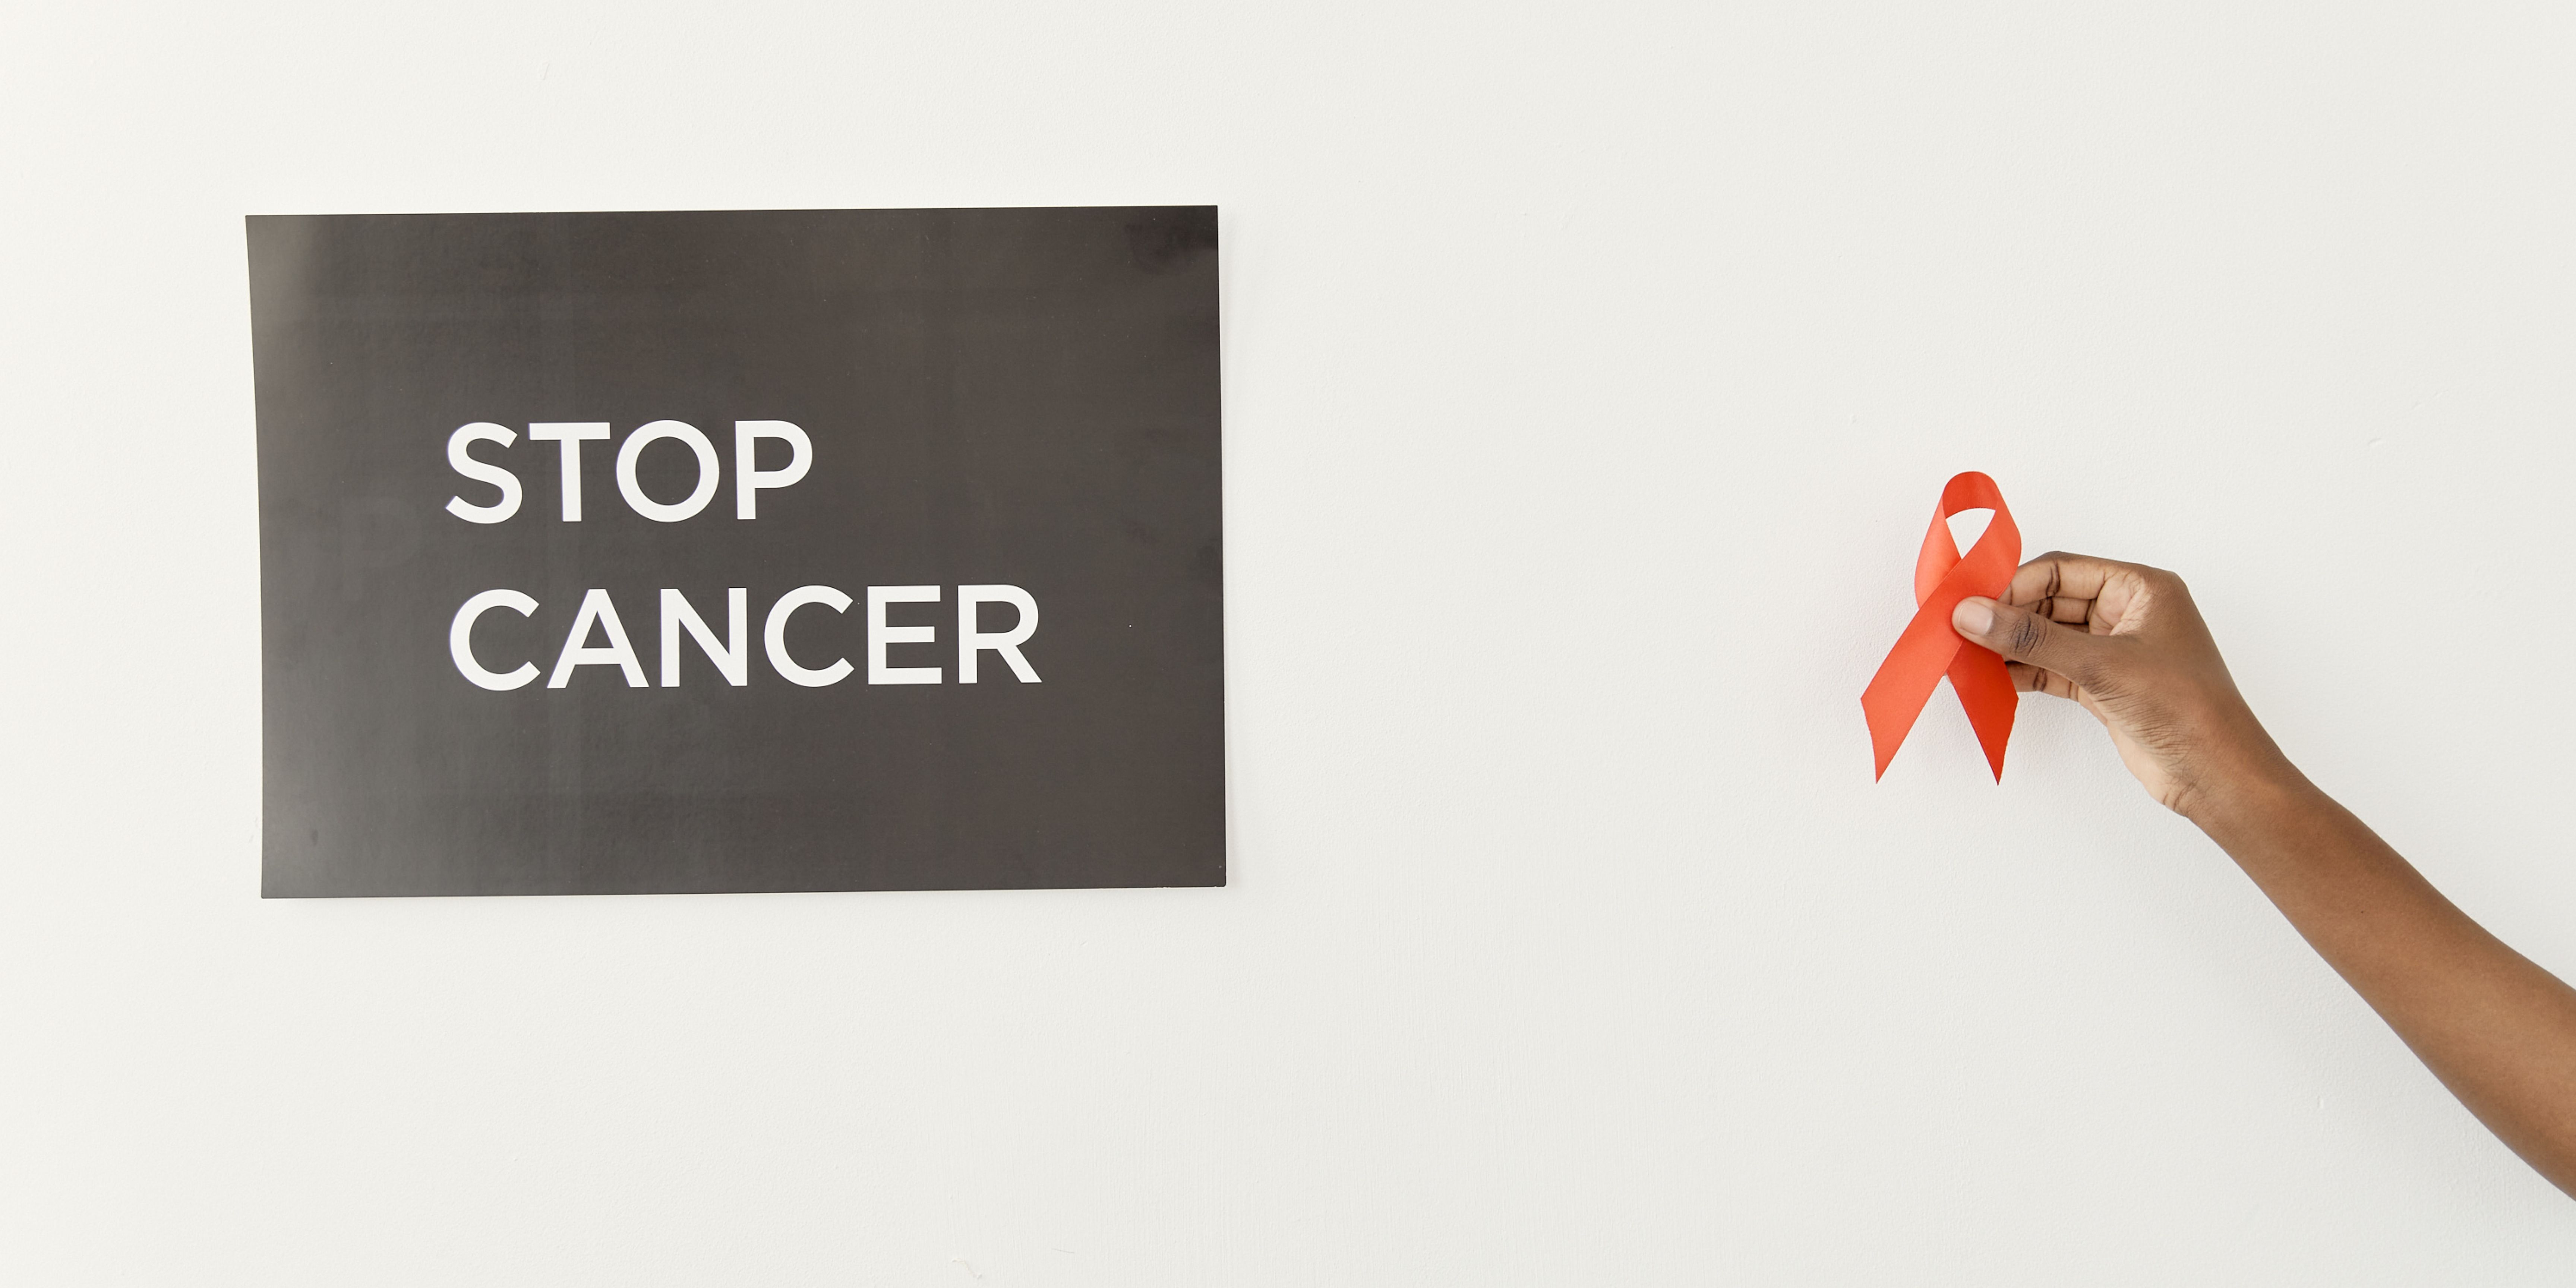 WHAT’S THE DIFFERENCE? BLOOD CANCERS: LEUKEMIA, LYMPHOMA, AND MULTIPLE MYELOMA